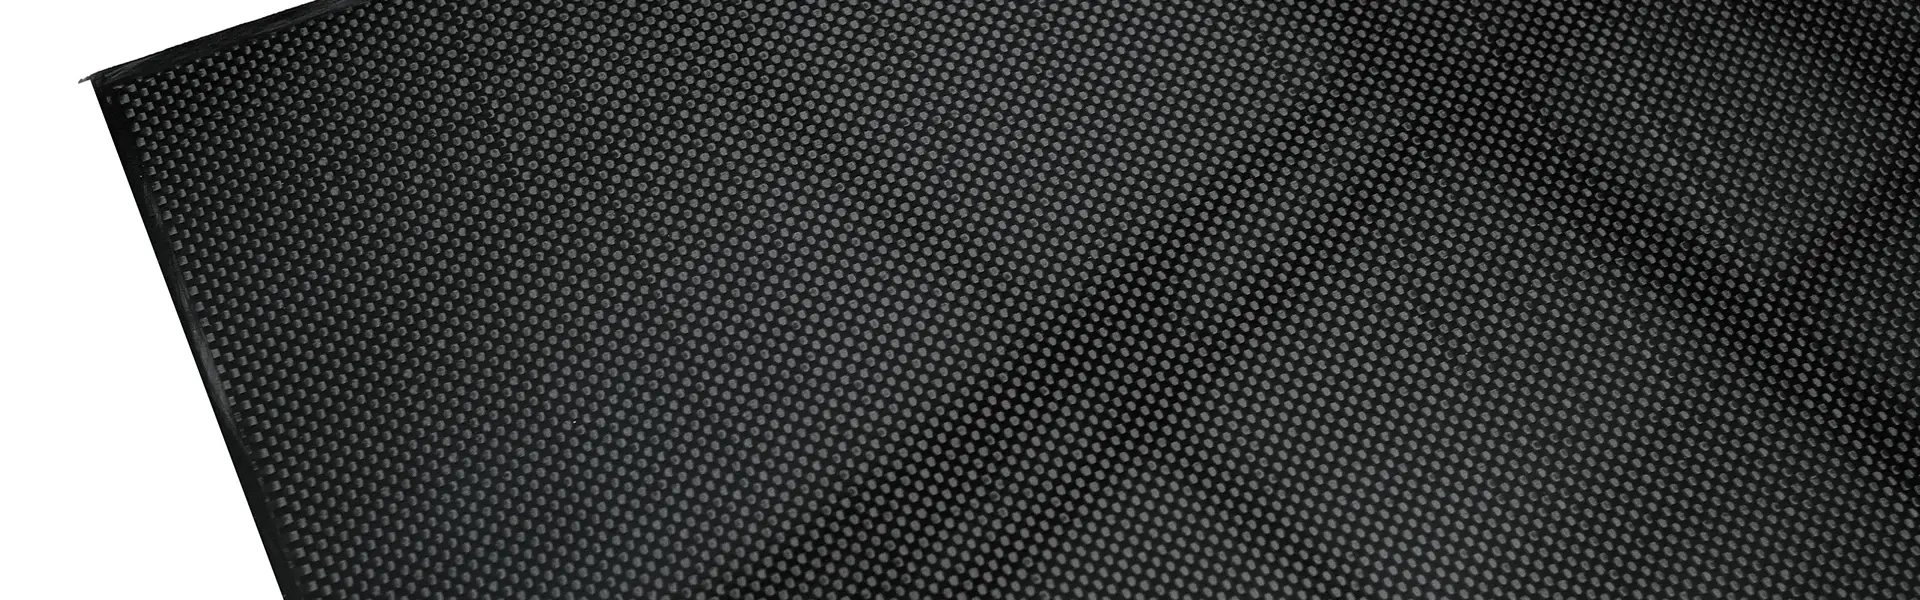 Synthesis and research of carbon fiber